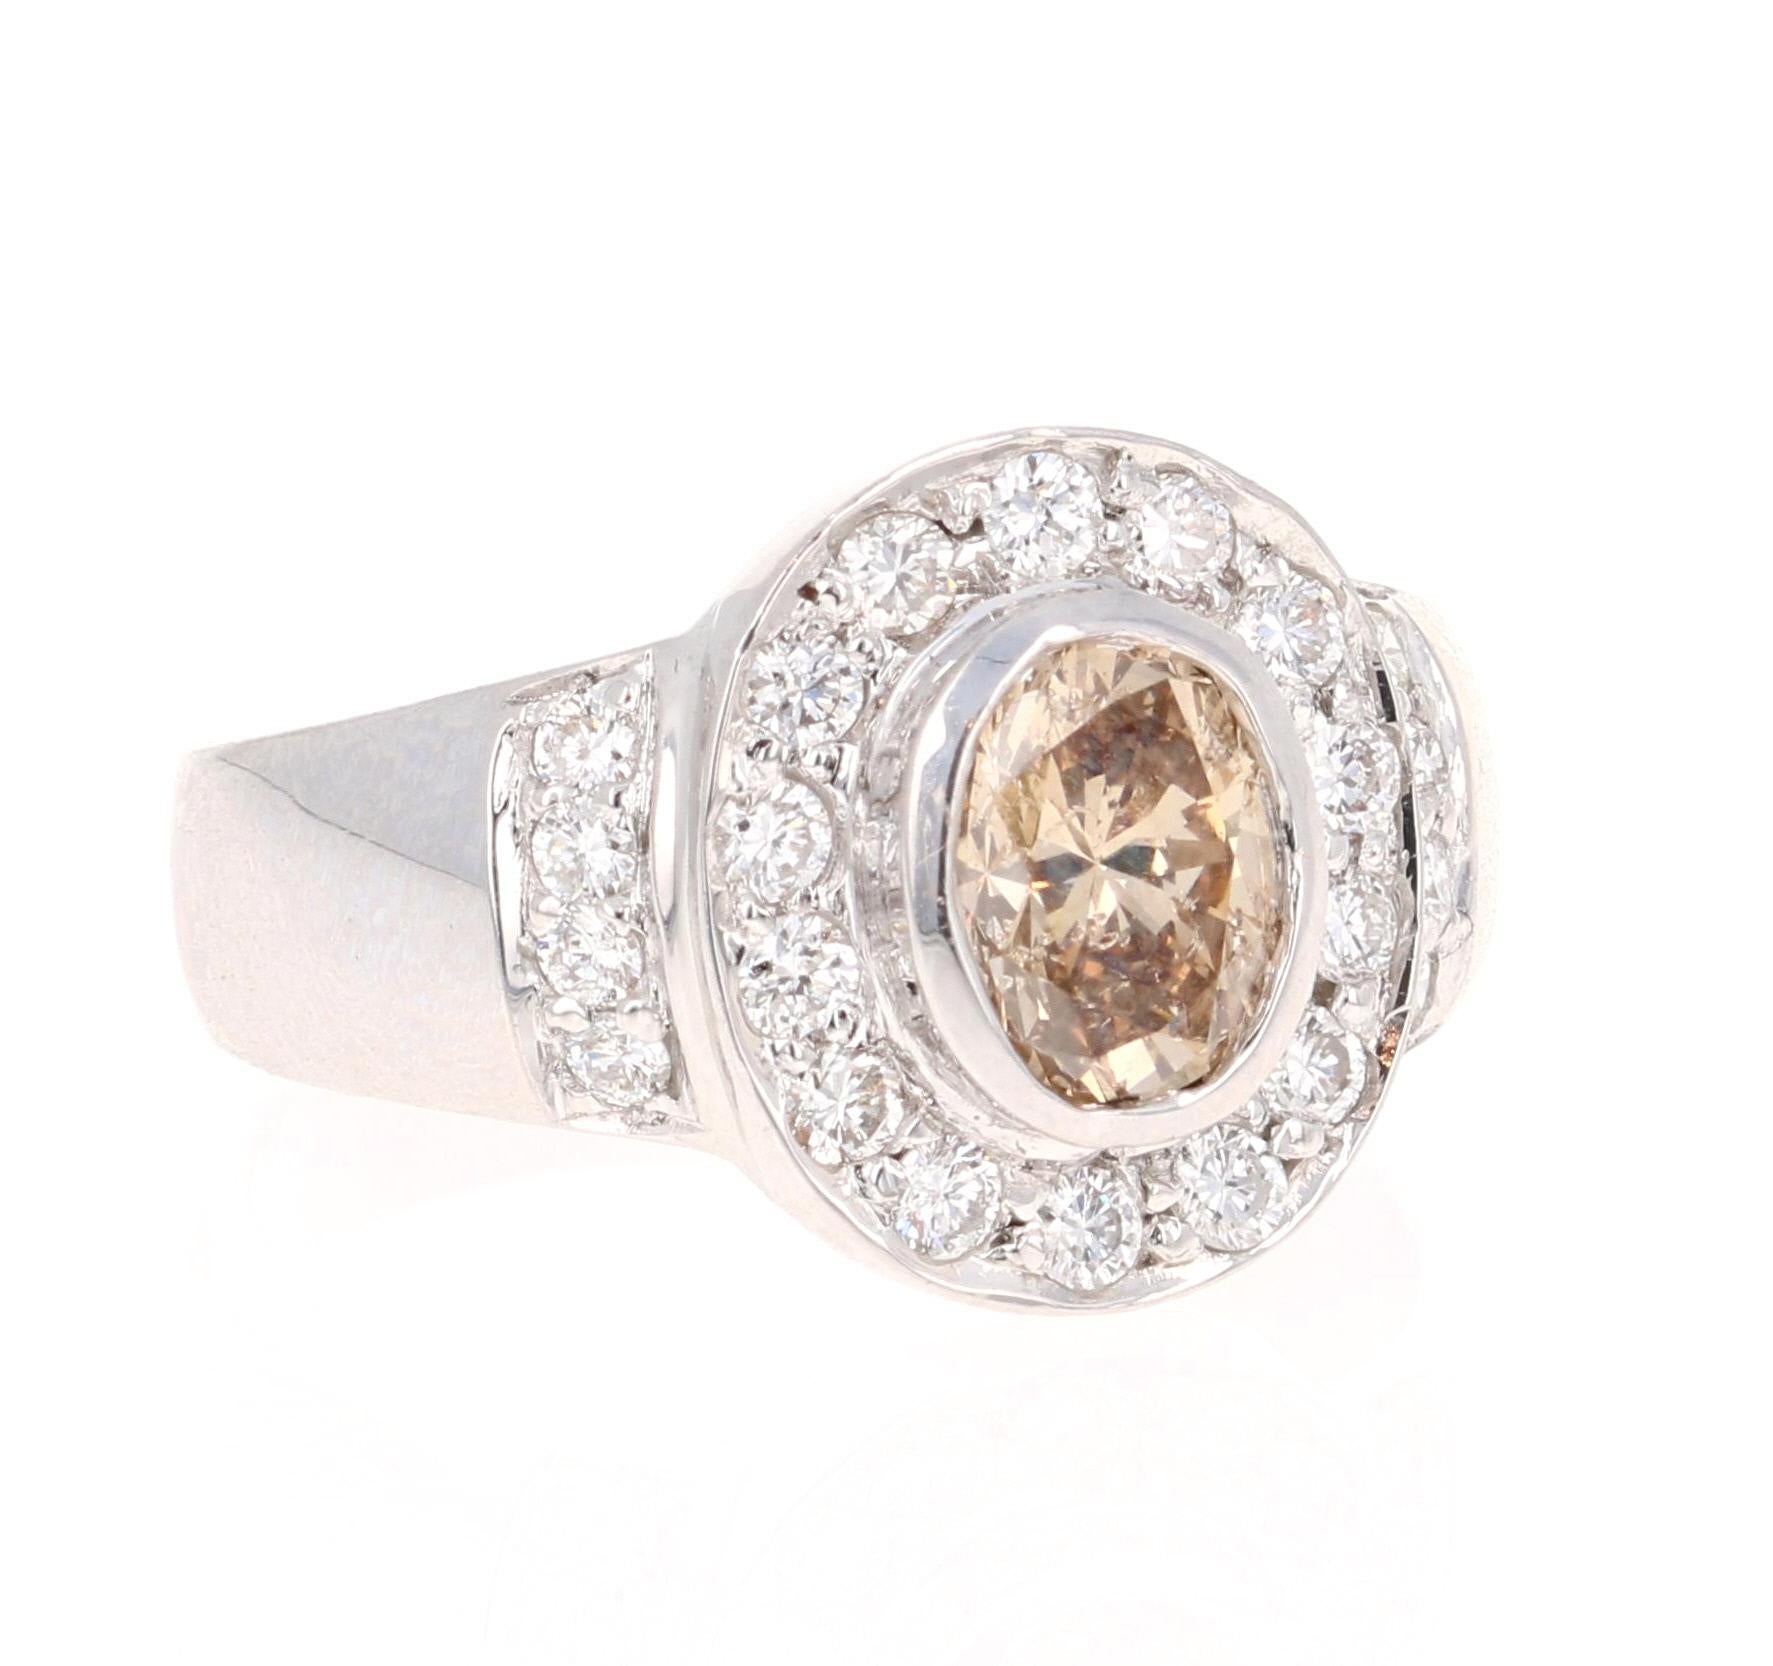 This versatile ring can be a cocktail ring, engagement ring, or an everyday ring! 

The center diamond is a natural, fancy colored Oval cut Brown/Champagne Diamond weighing 1.01 Carats. The ring is surrounded by a halo of 22 Round Cut Diamonds that